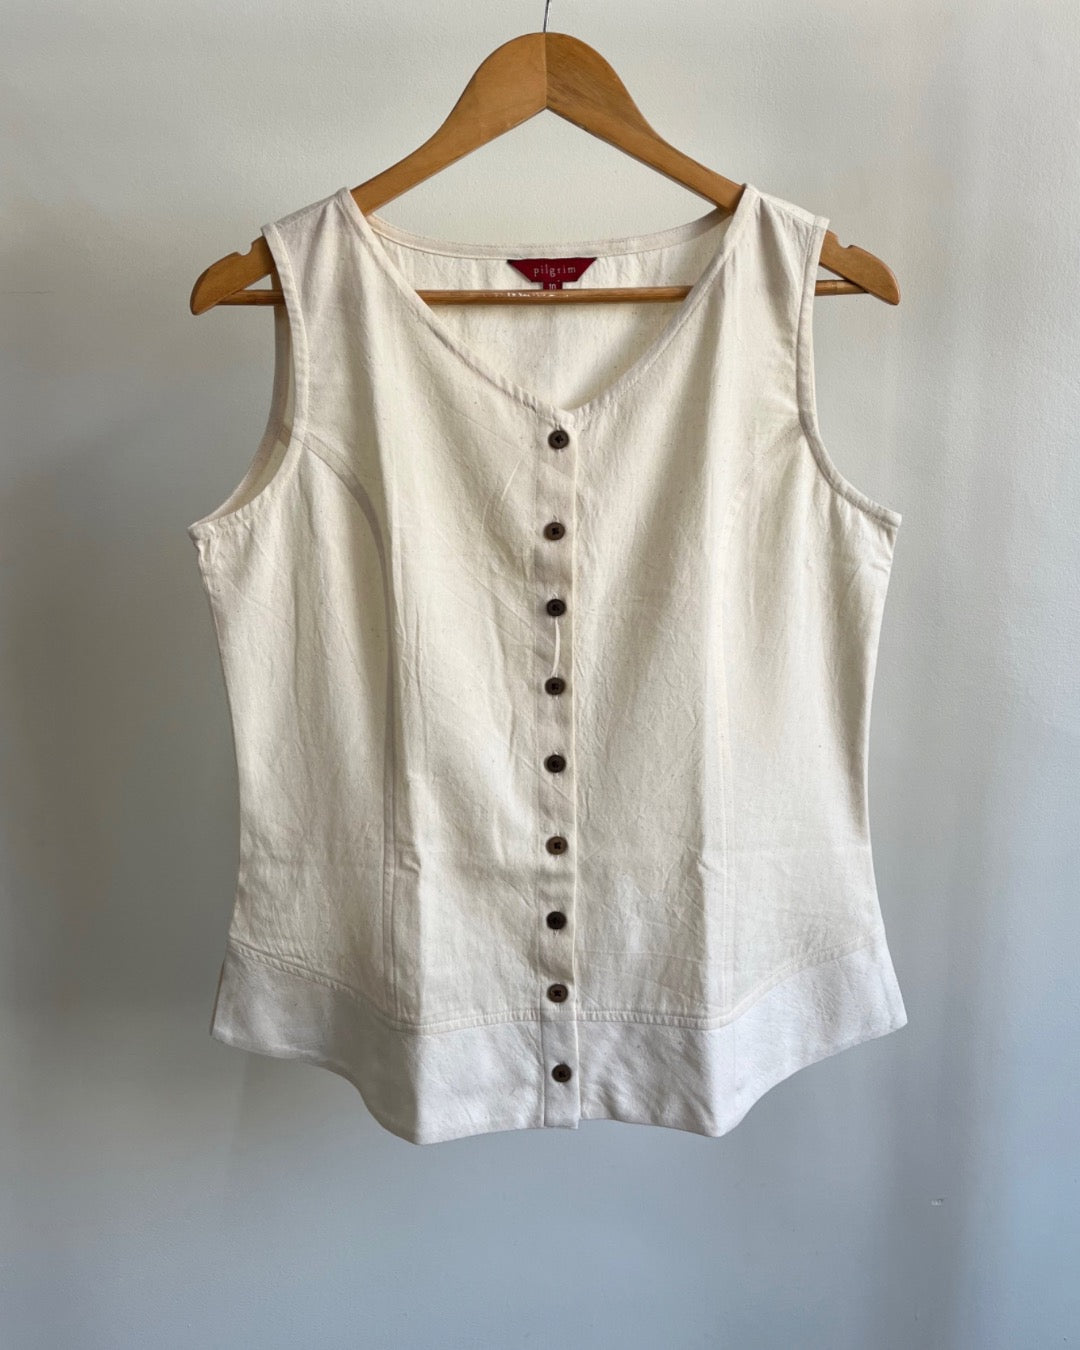 Butterfly Jacket Top - Off White Cotton